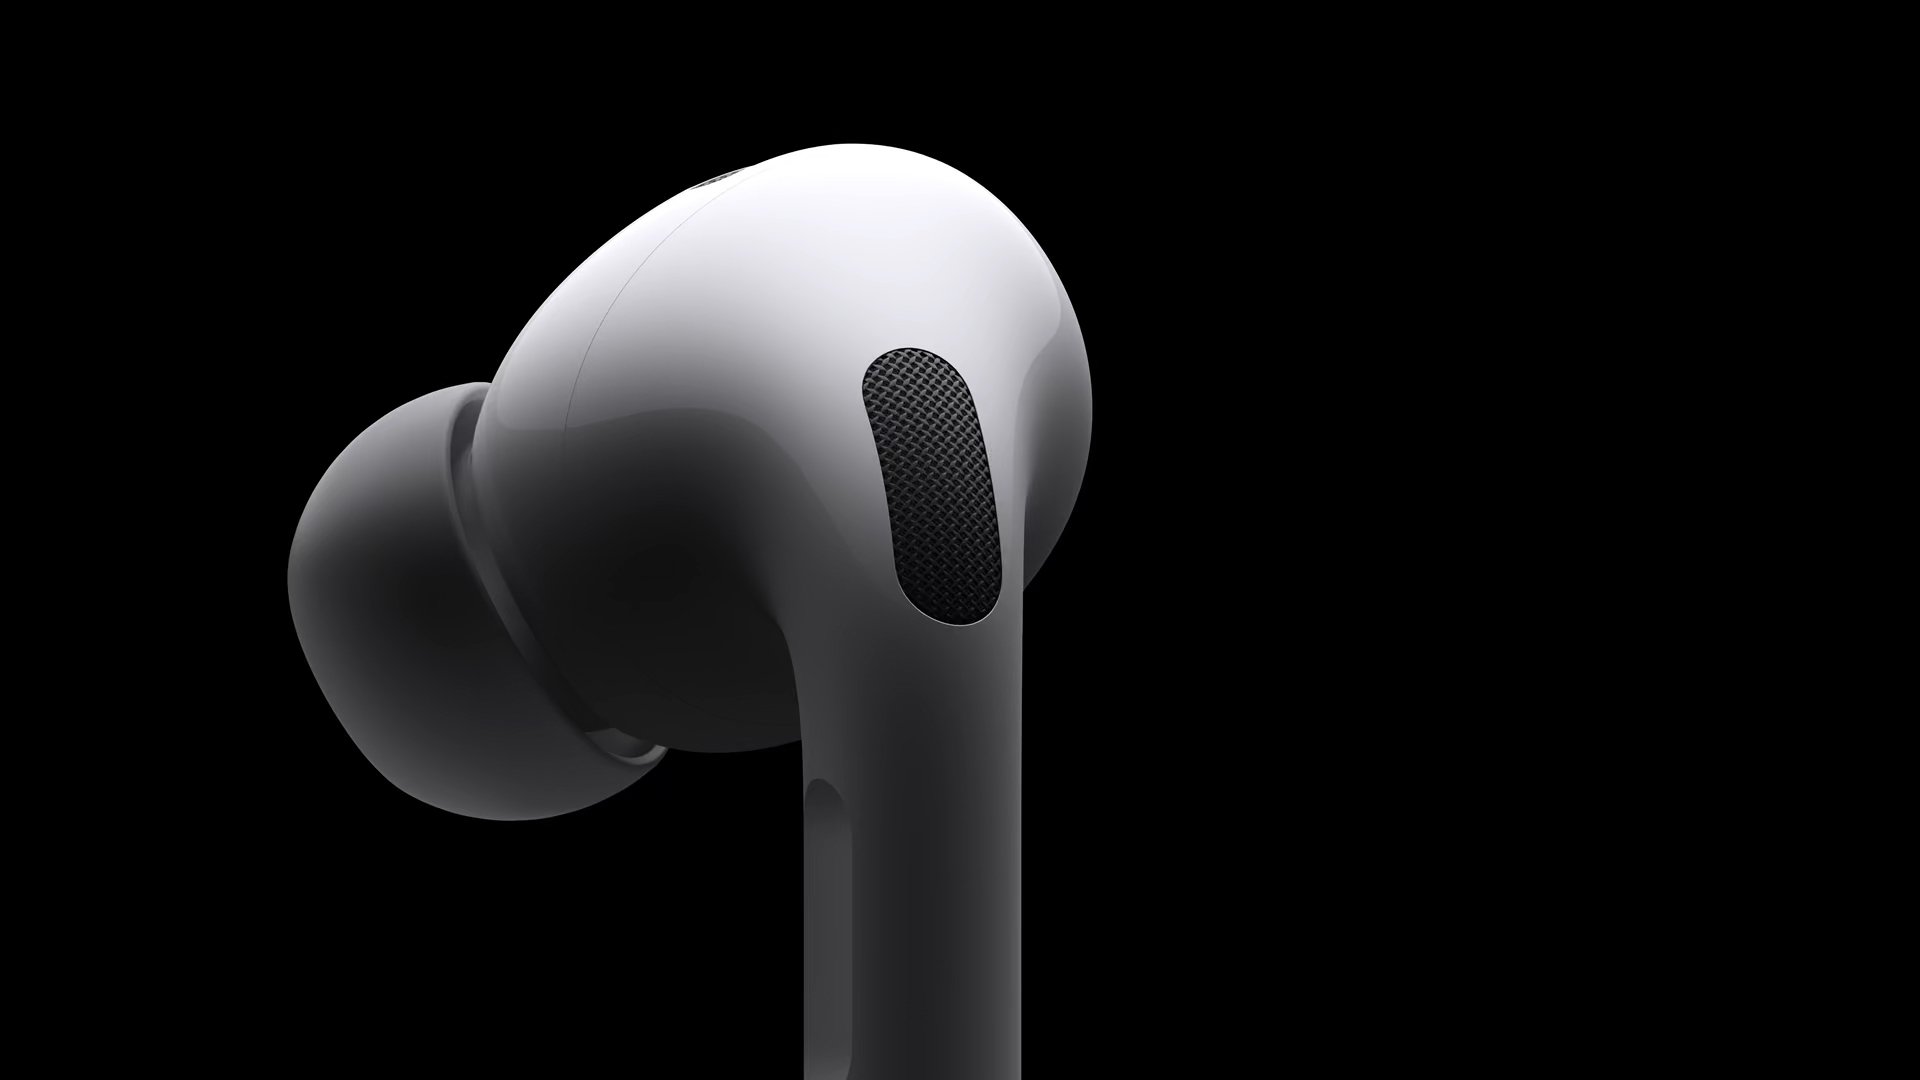 Here’s how to pre-order the new AirPods Pro 2